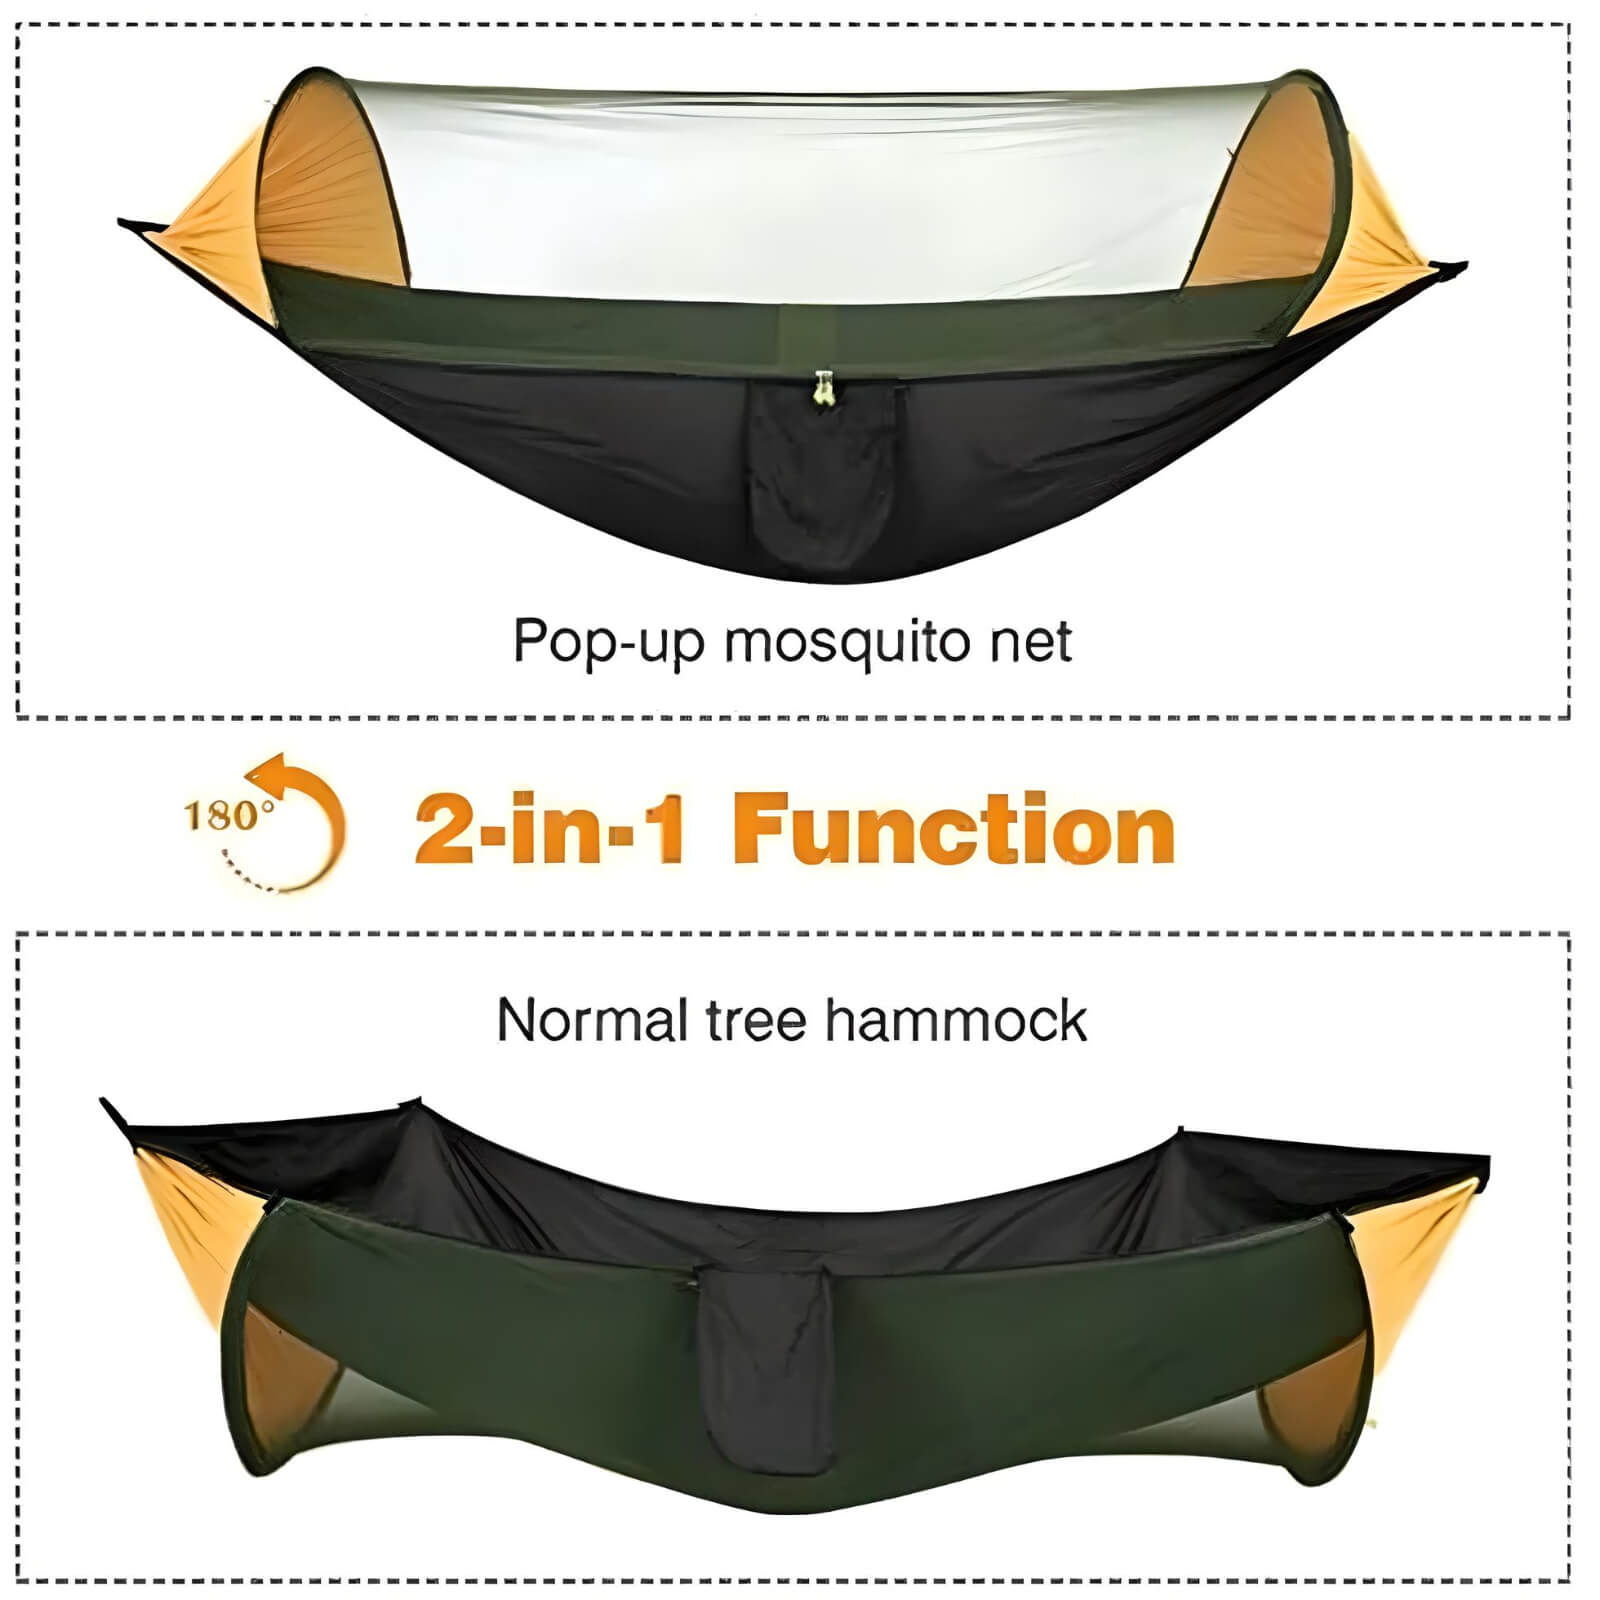 hammock-with-mosquito-net-and-rainfly-2-in-1-function